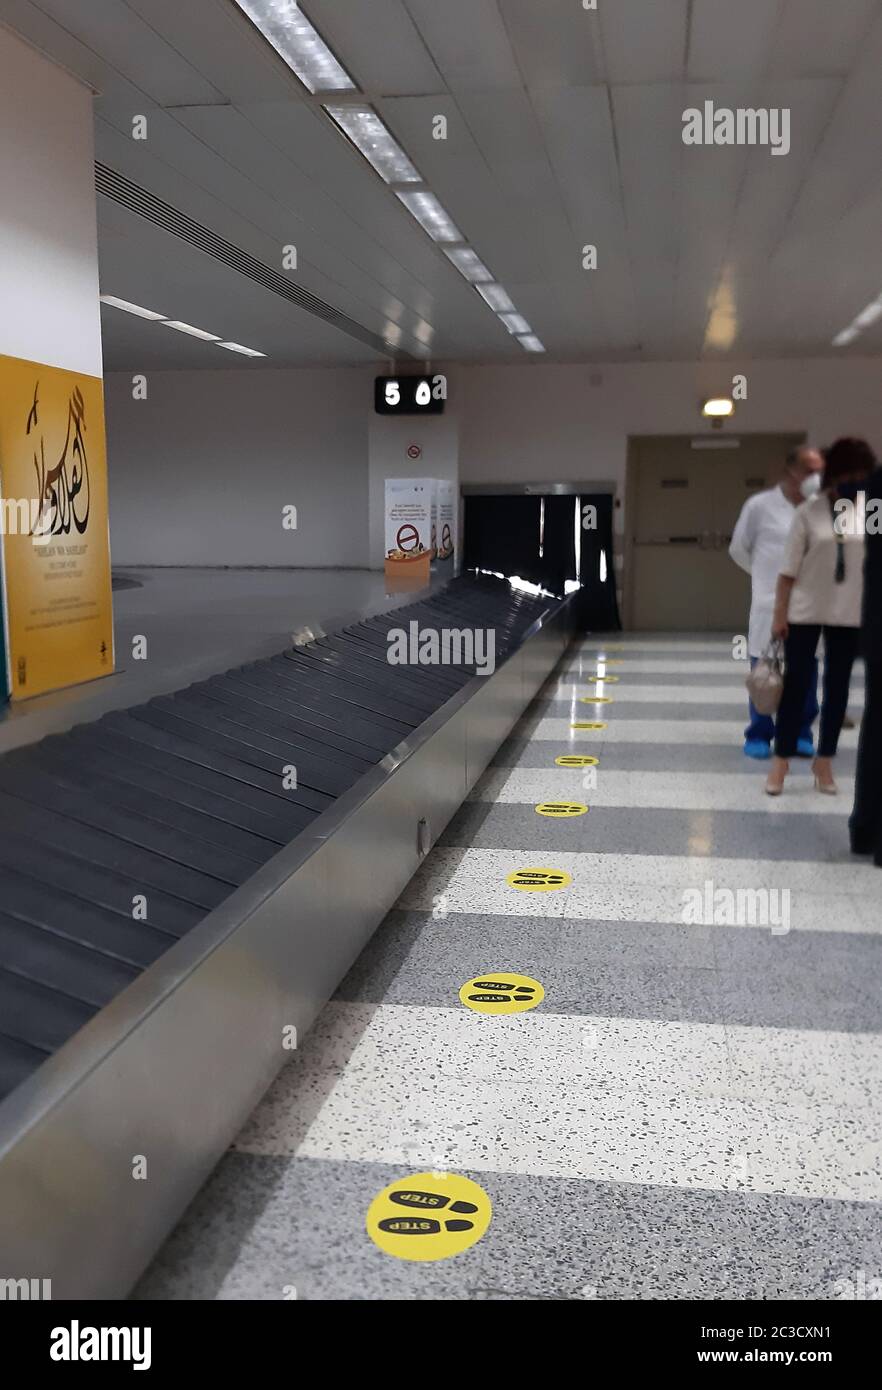 Beirut. 19th June, 2020. Photo taken on June 19, 2020 shows signs on the ground reminding people of social distancing at Beirut Rafic Hariri International Airport in Beirut, Lebanon. The airport is expected to reopen on July 1. Credit: Bilal Jawich/Xinhua/Alamy Live News Stock Photo